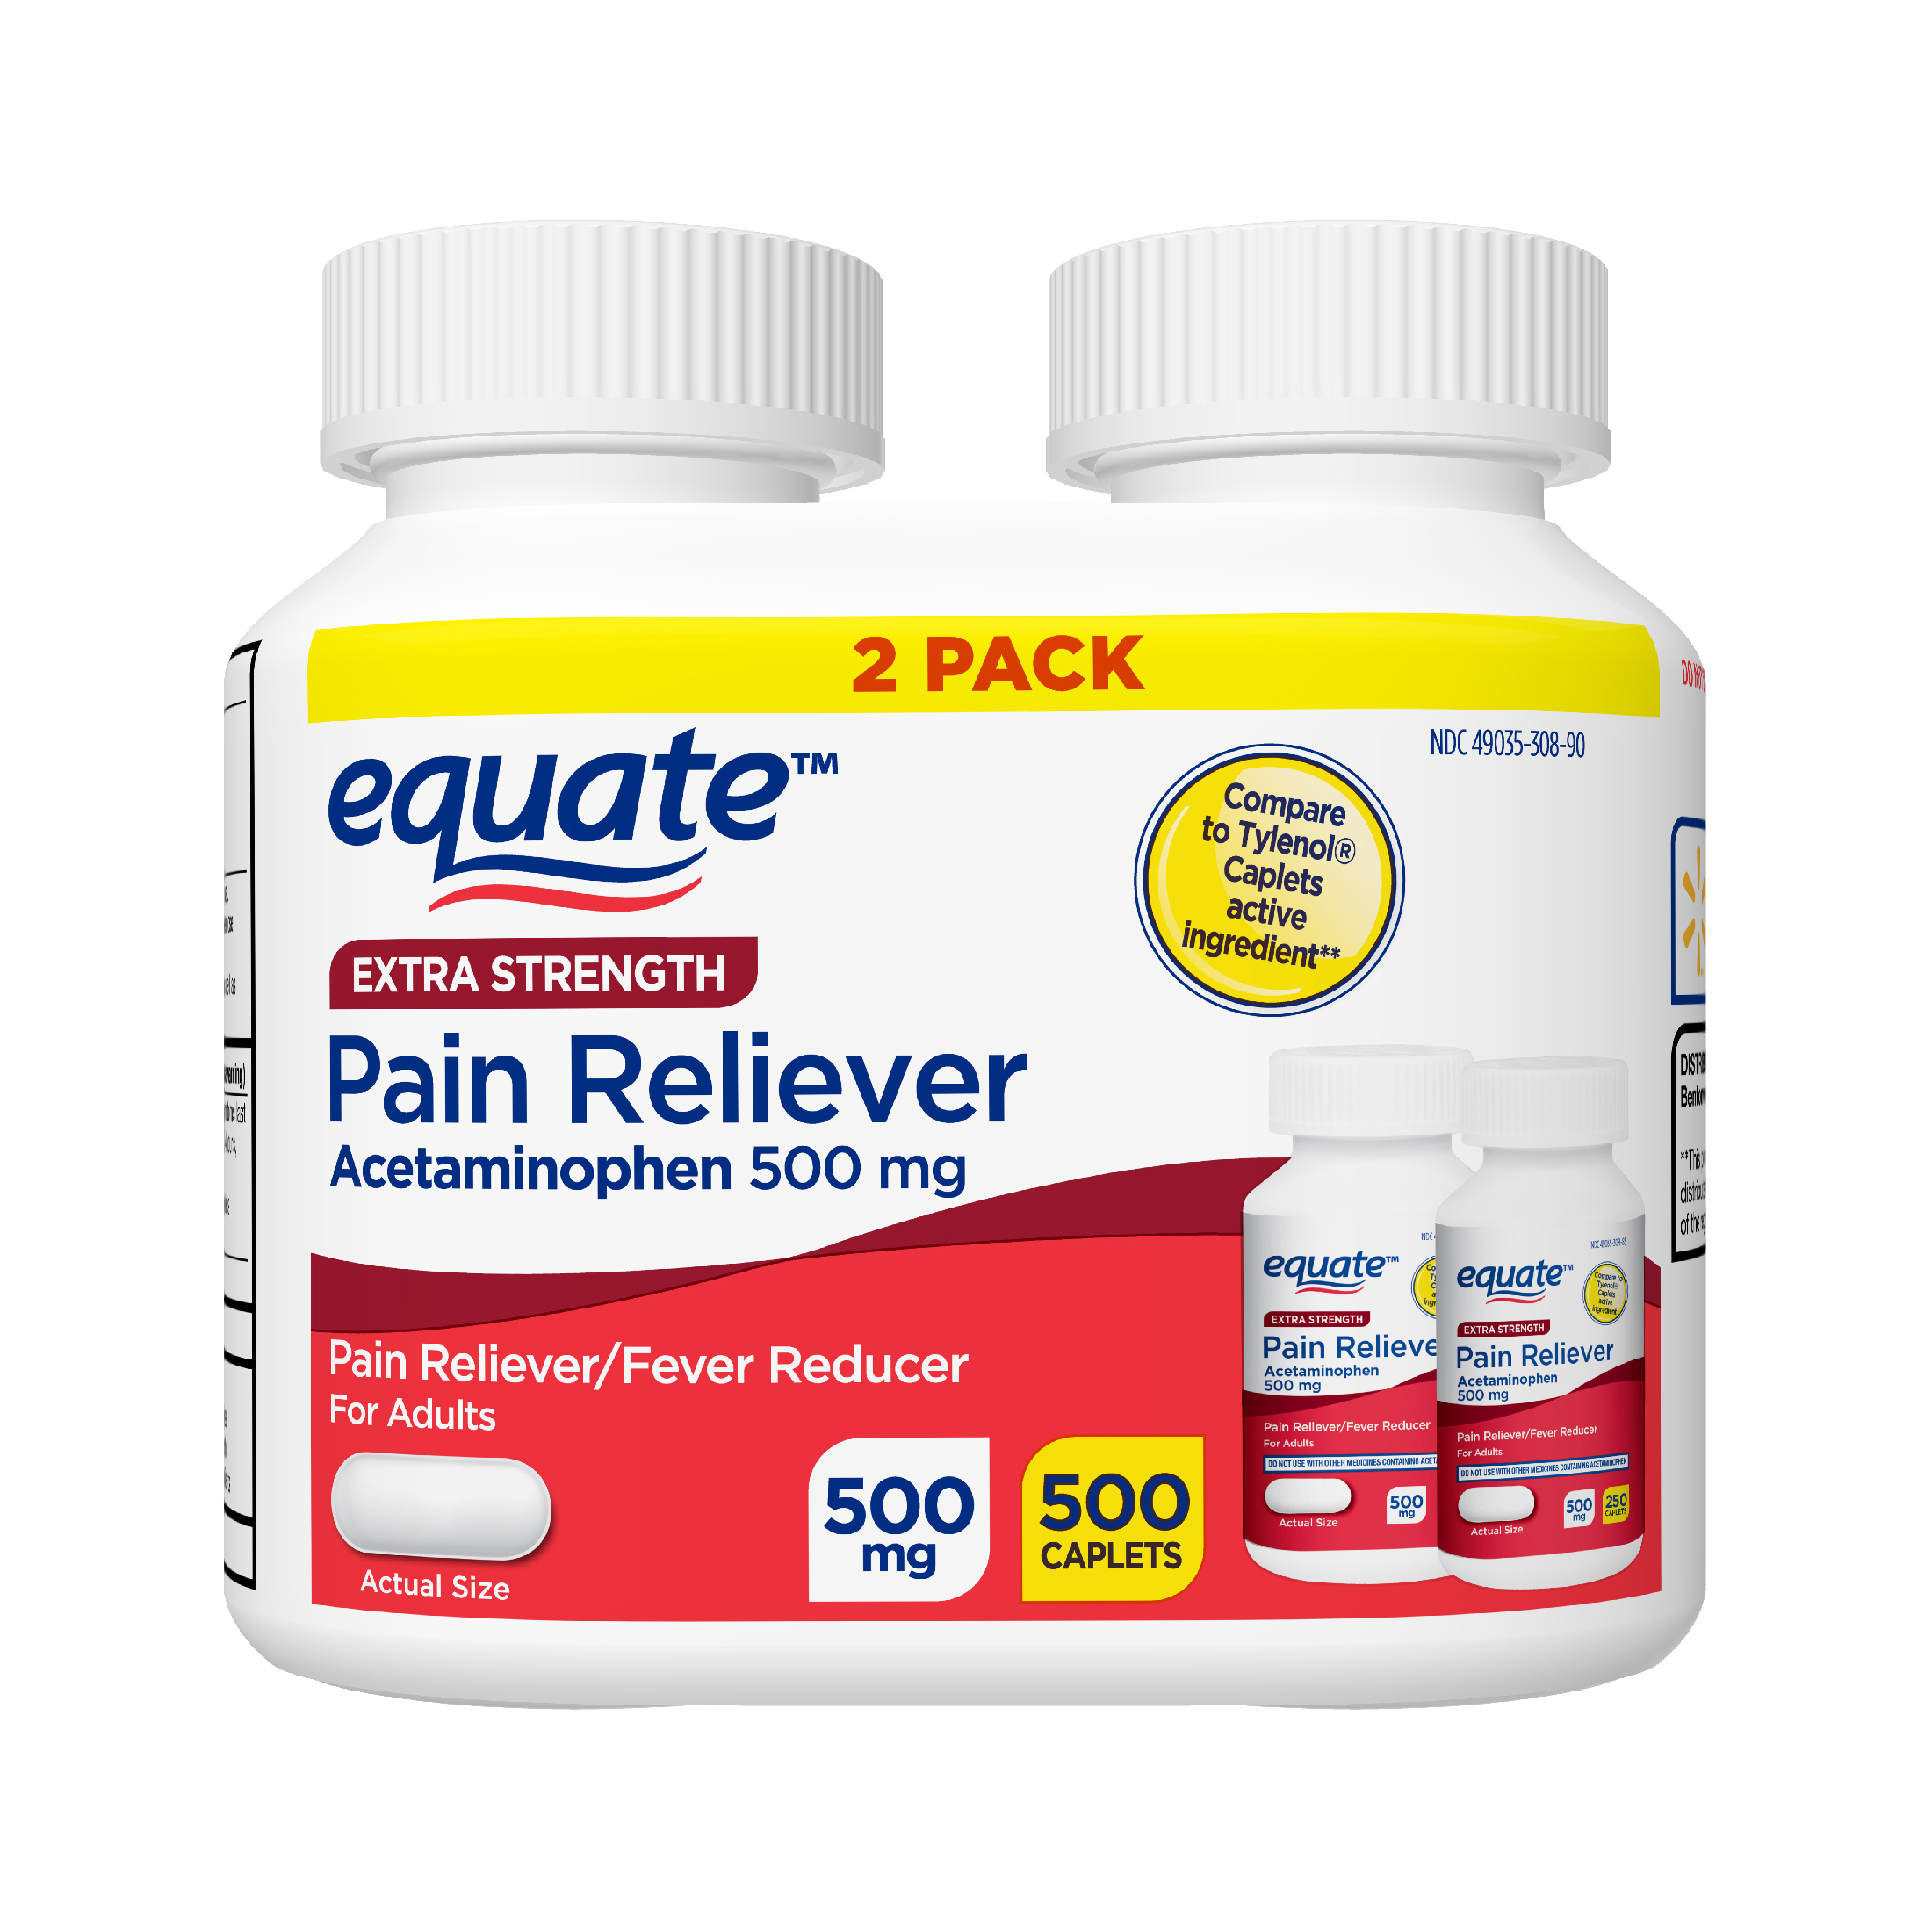 Equate Extra Strength Acetaminophen Caplets, 500 mg, 2 pack, 500 Count - image 1 of 7